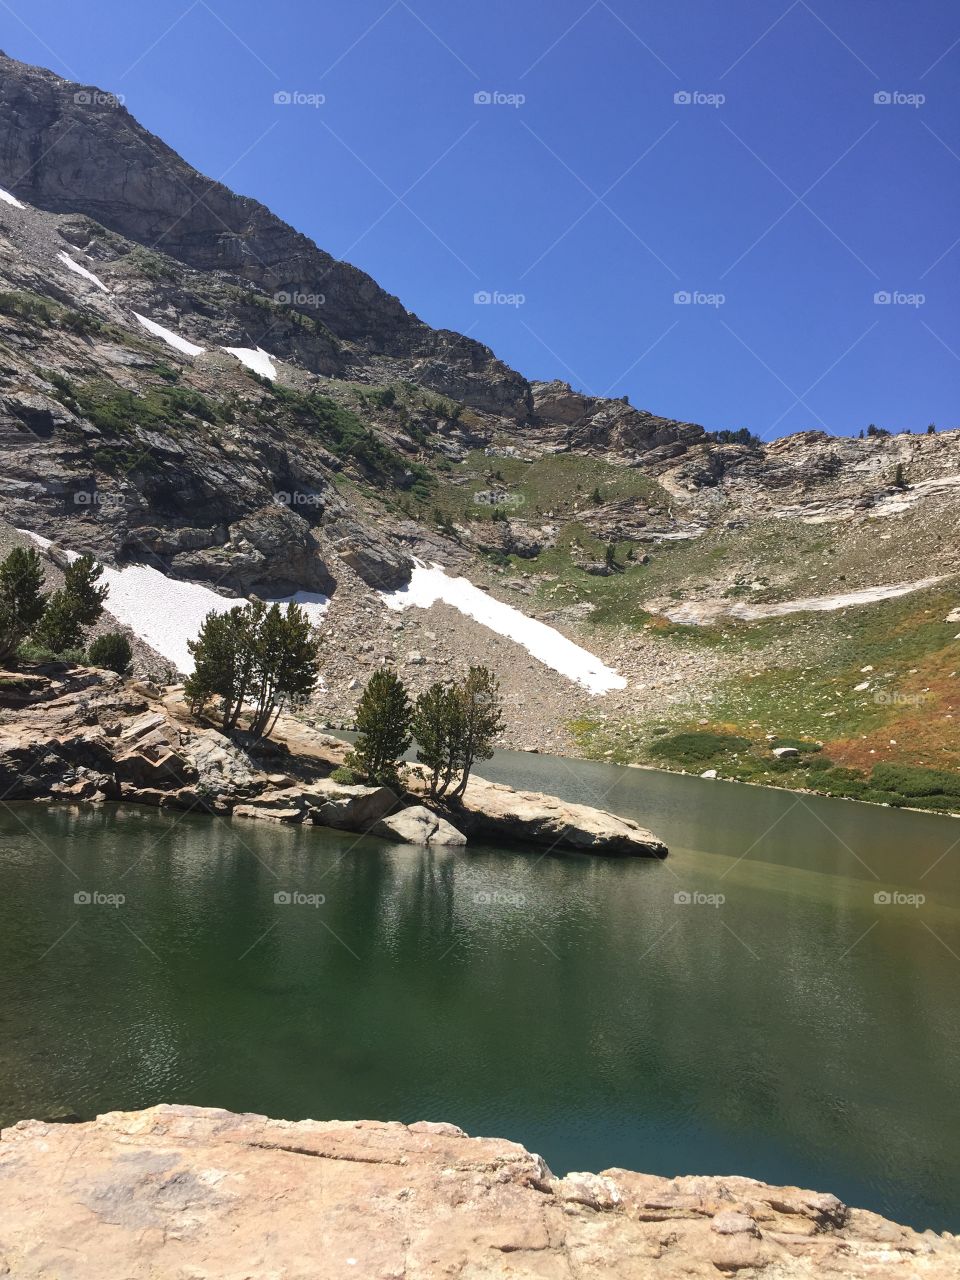 Lamoille Lake. Nevada. There is still some snow up higher in the mountains in July!